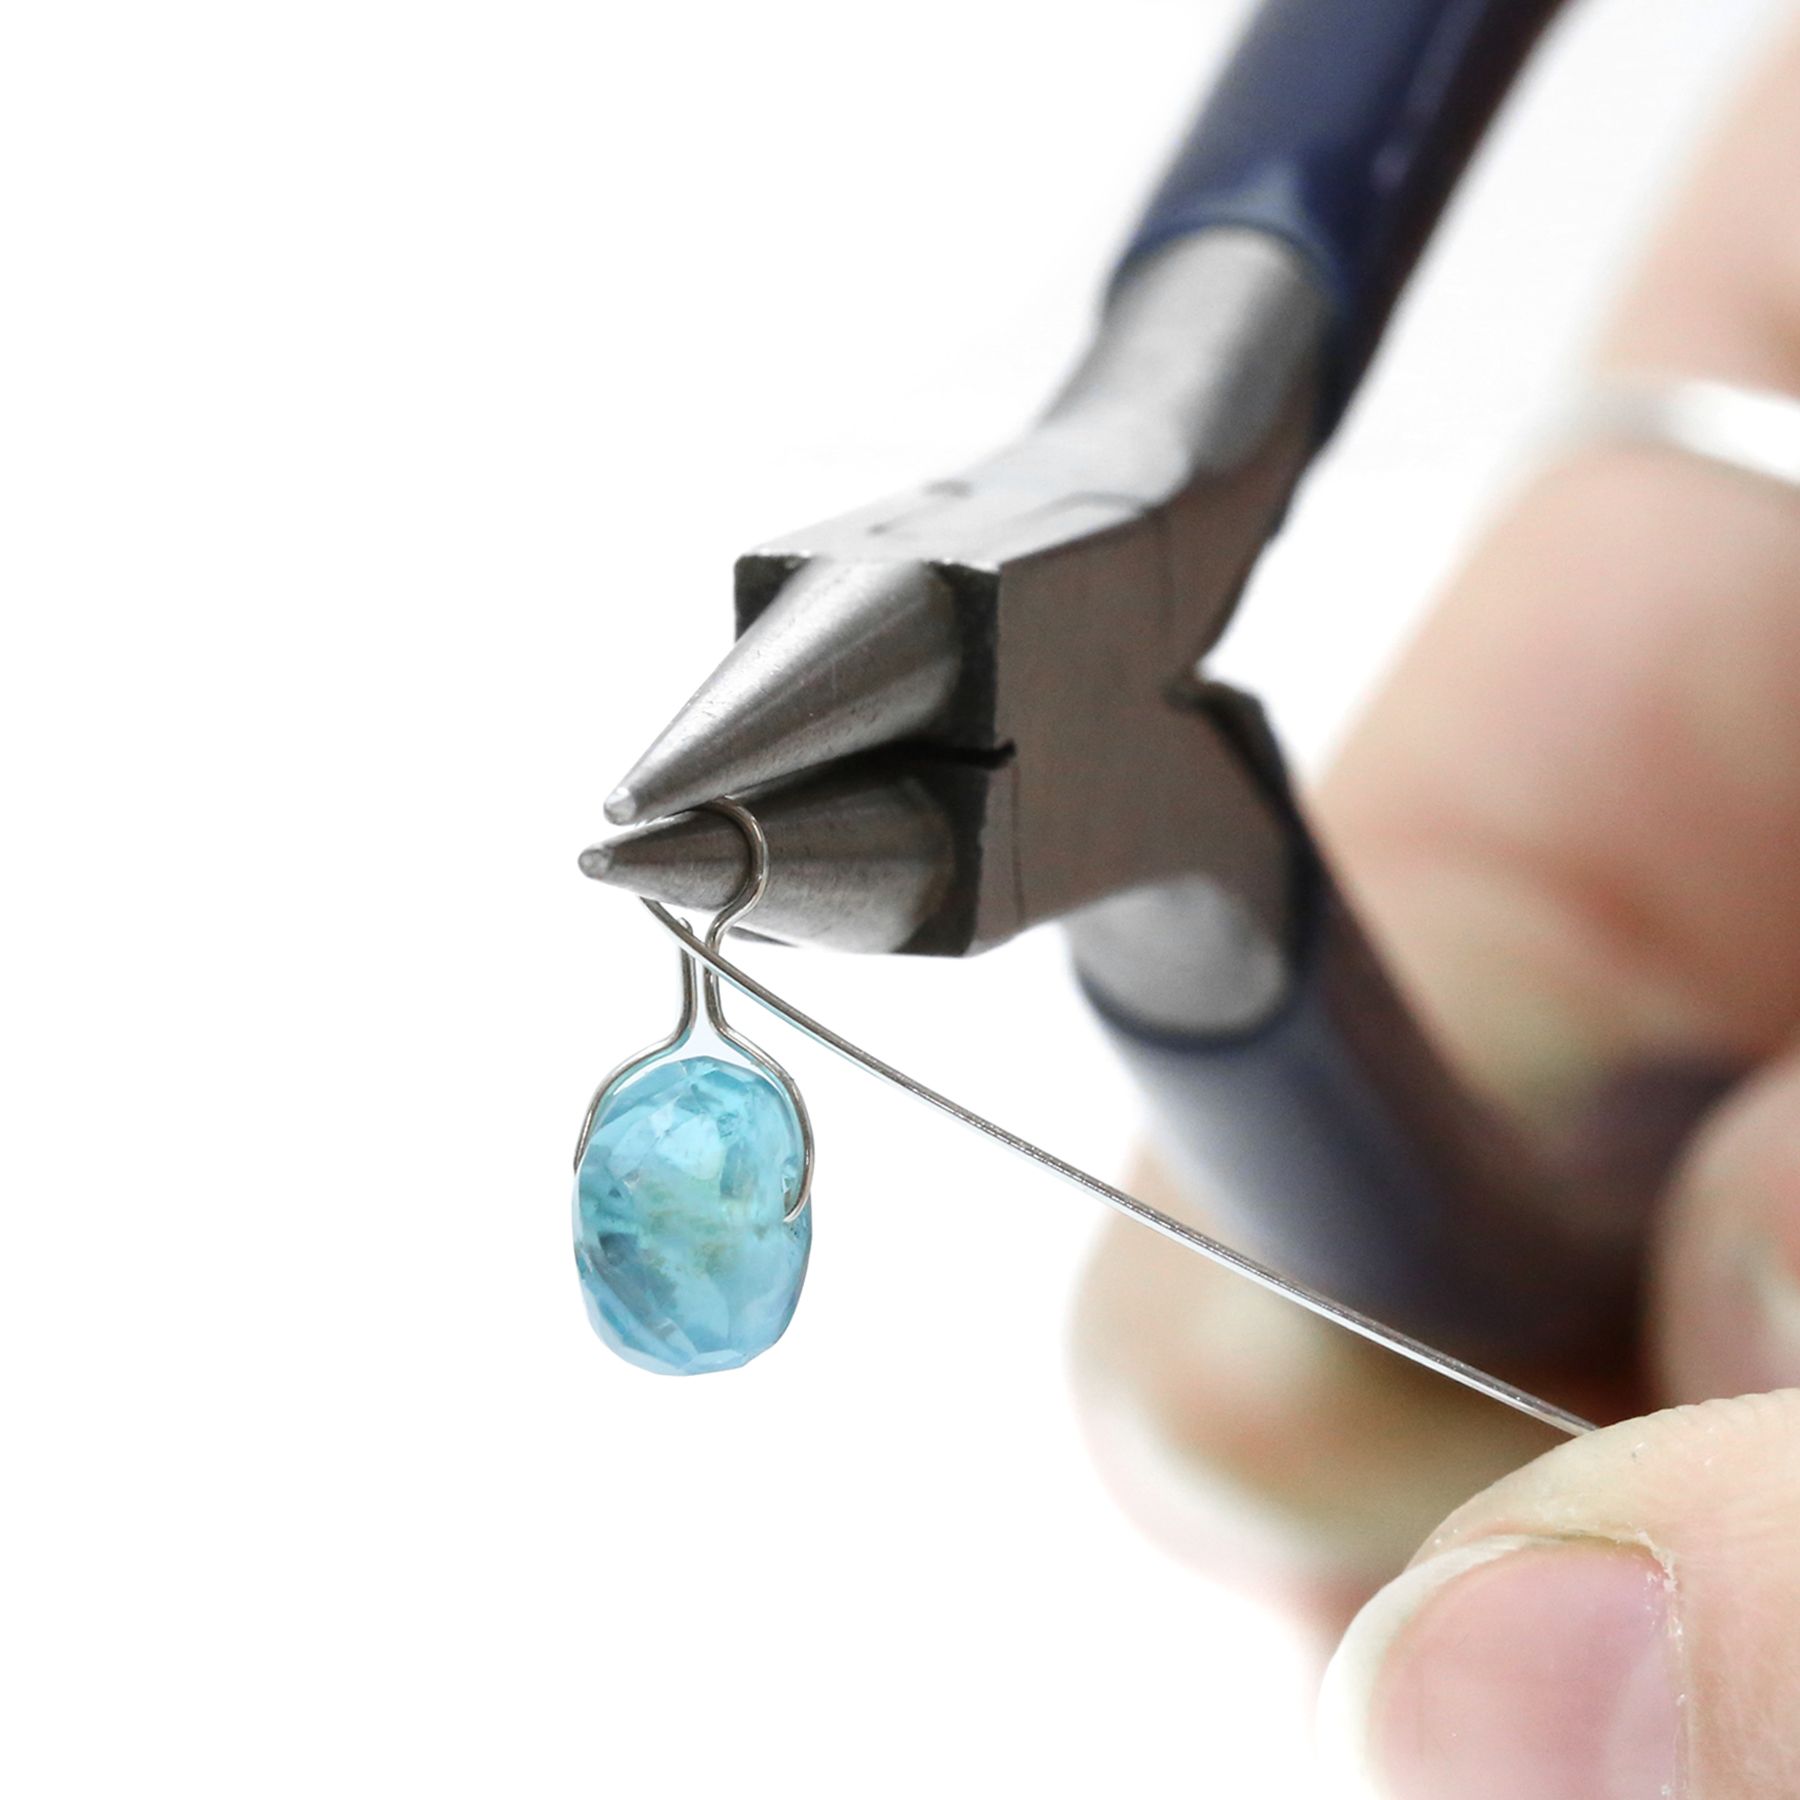 How To Work Harden Jewellery Making Wire